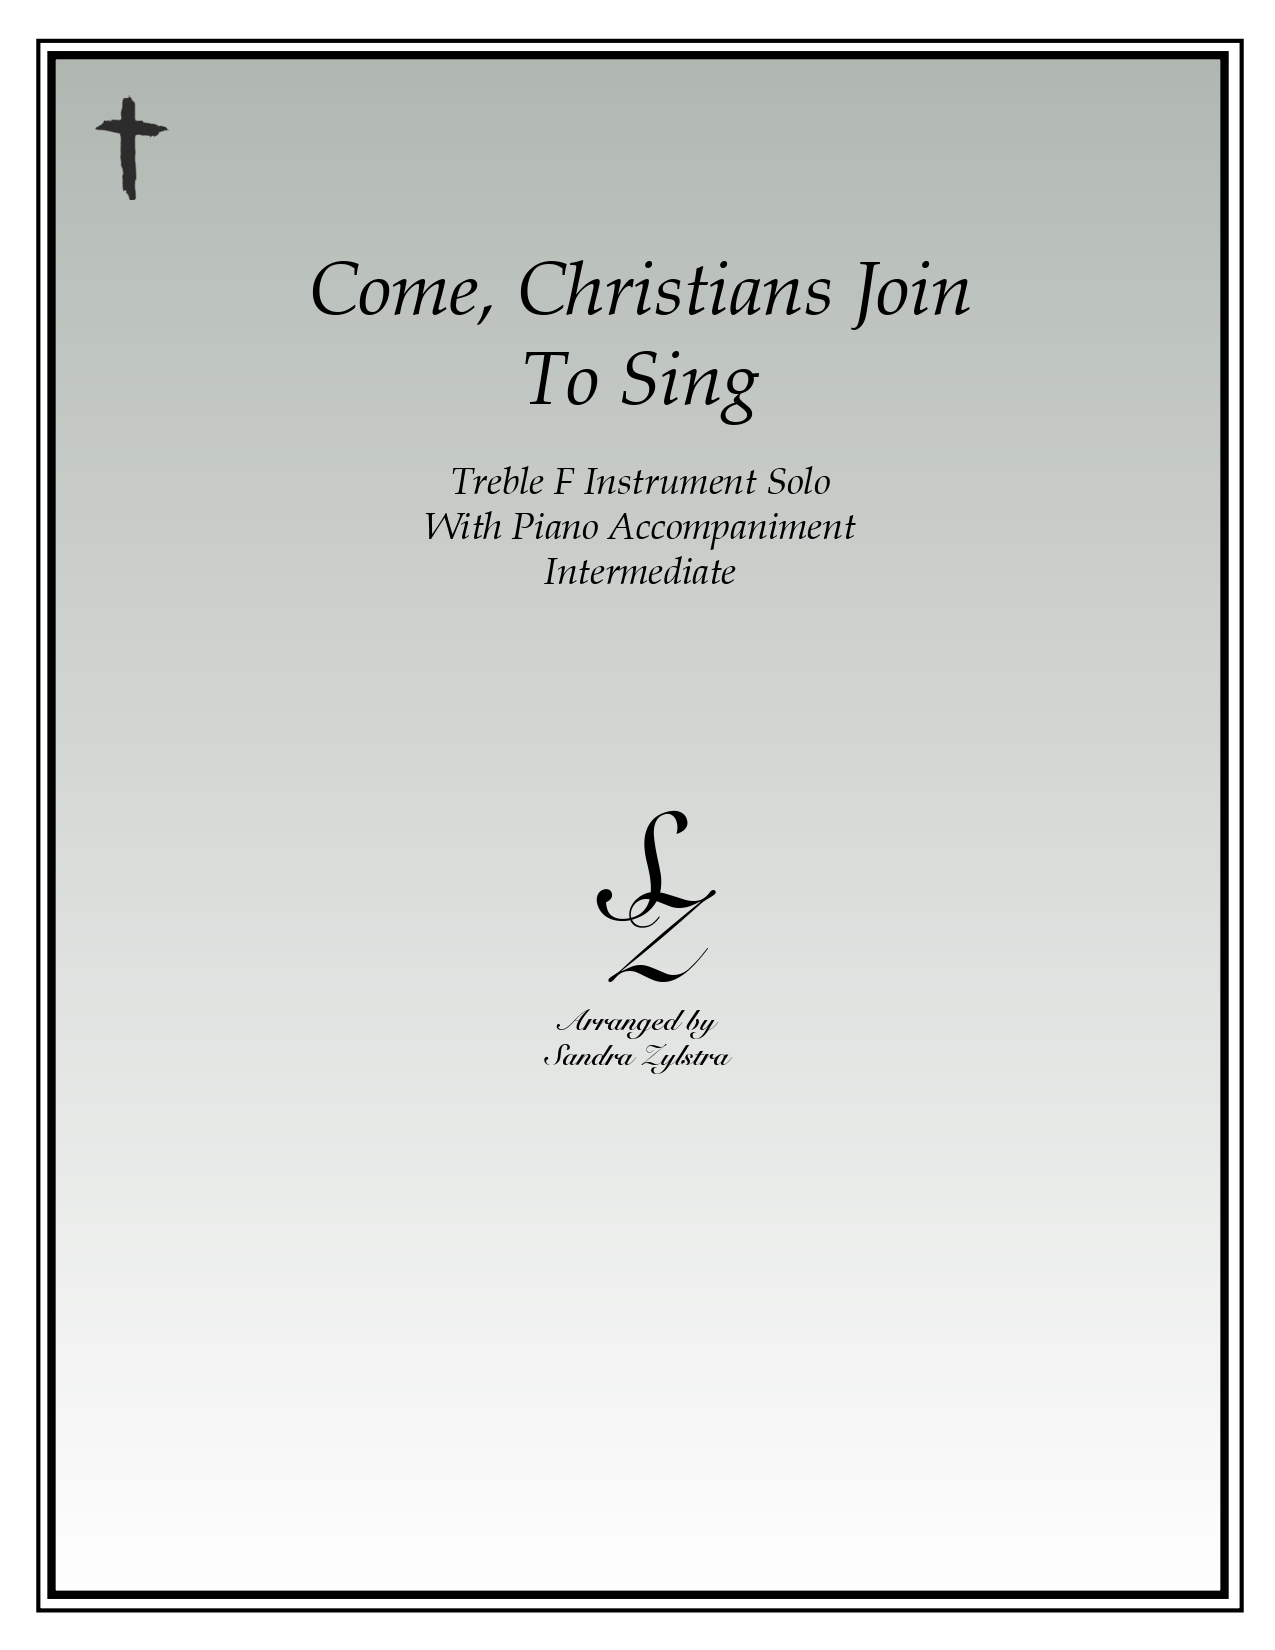 Come Christians Join To Sing F instrument solo part cover page 00011